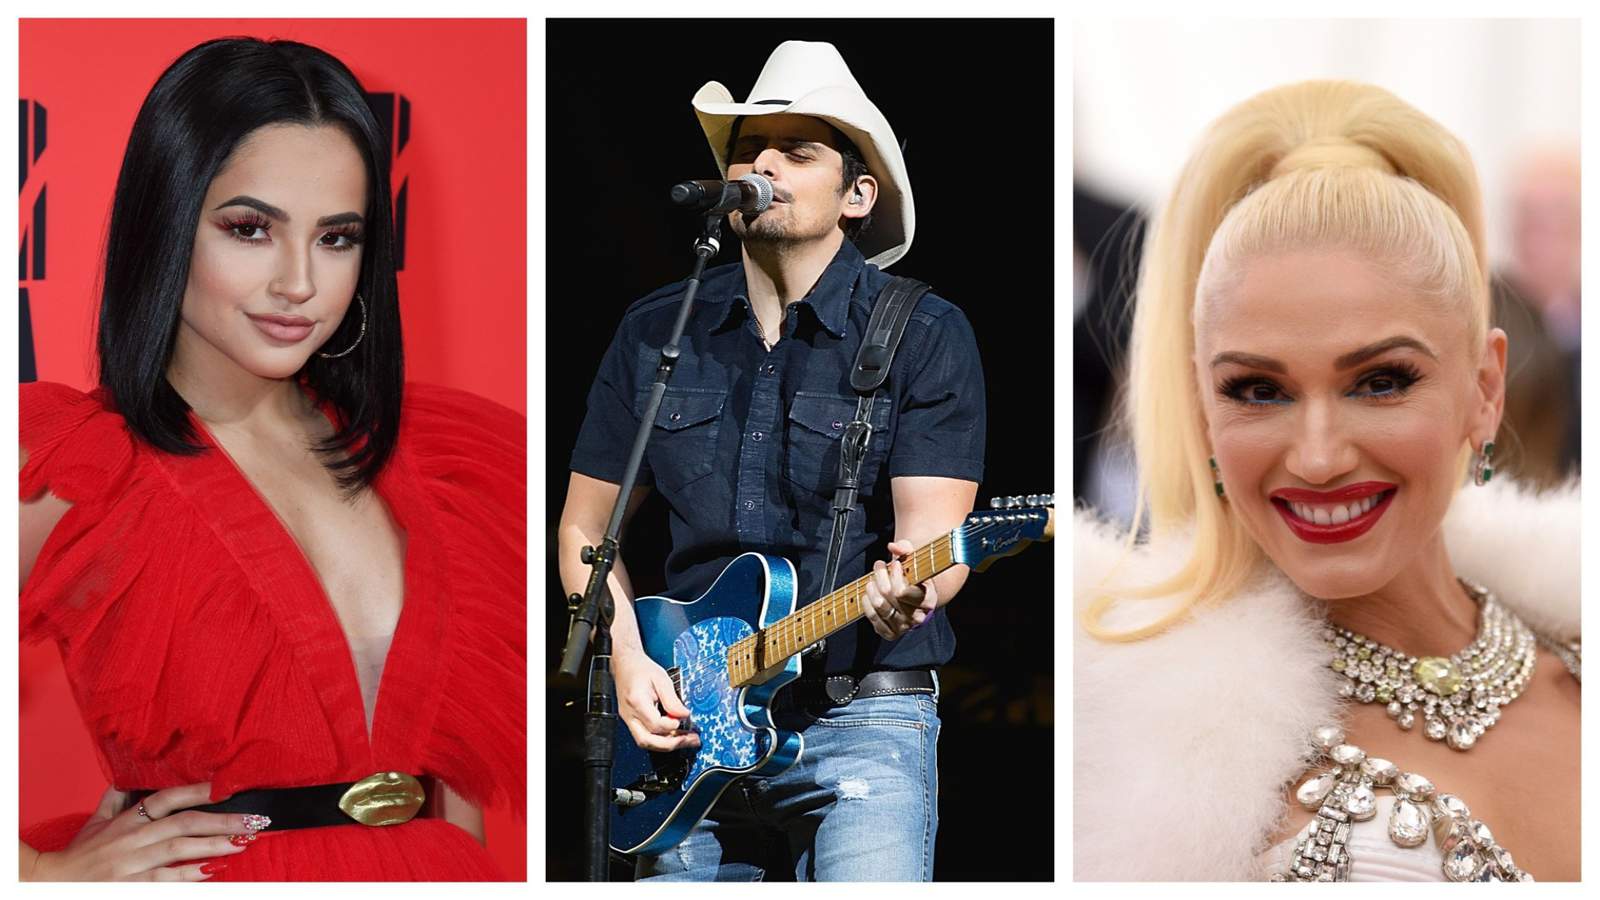 The big names headed to the Houston Livestock Show and Rodeo